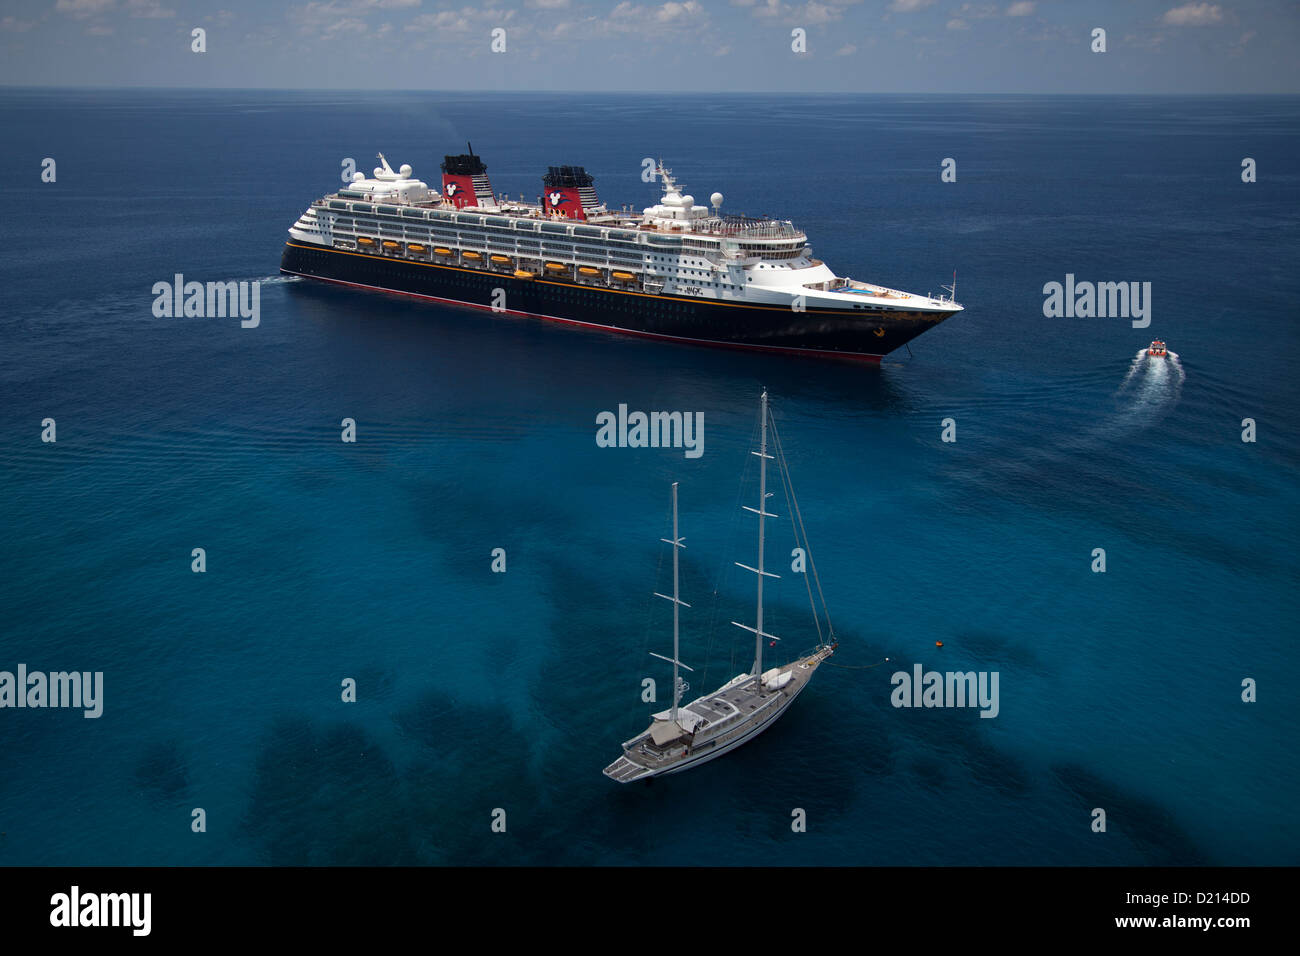 Aerial view of a sailboat and cruise ship Disney Magic (Disney Cruise Line), George Town, Grand Cayman, Cayman Islands, Caribbea Stock Photo